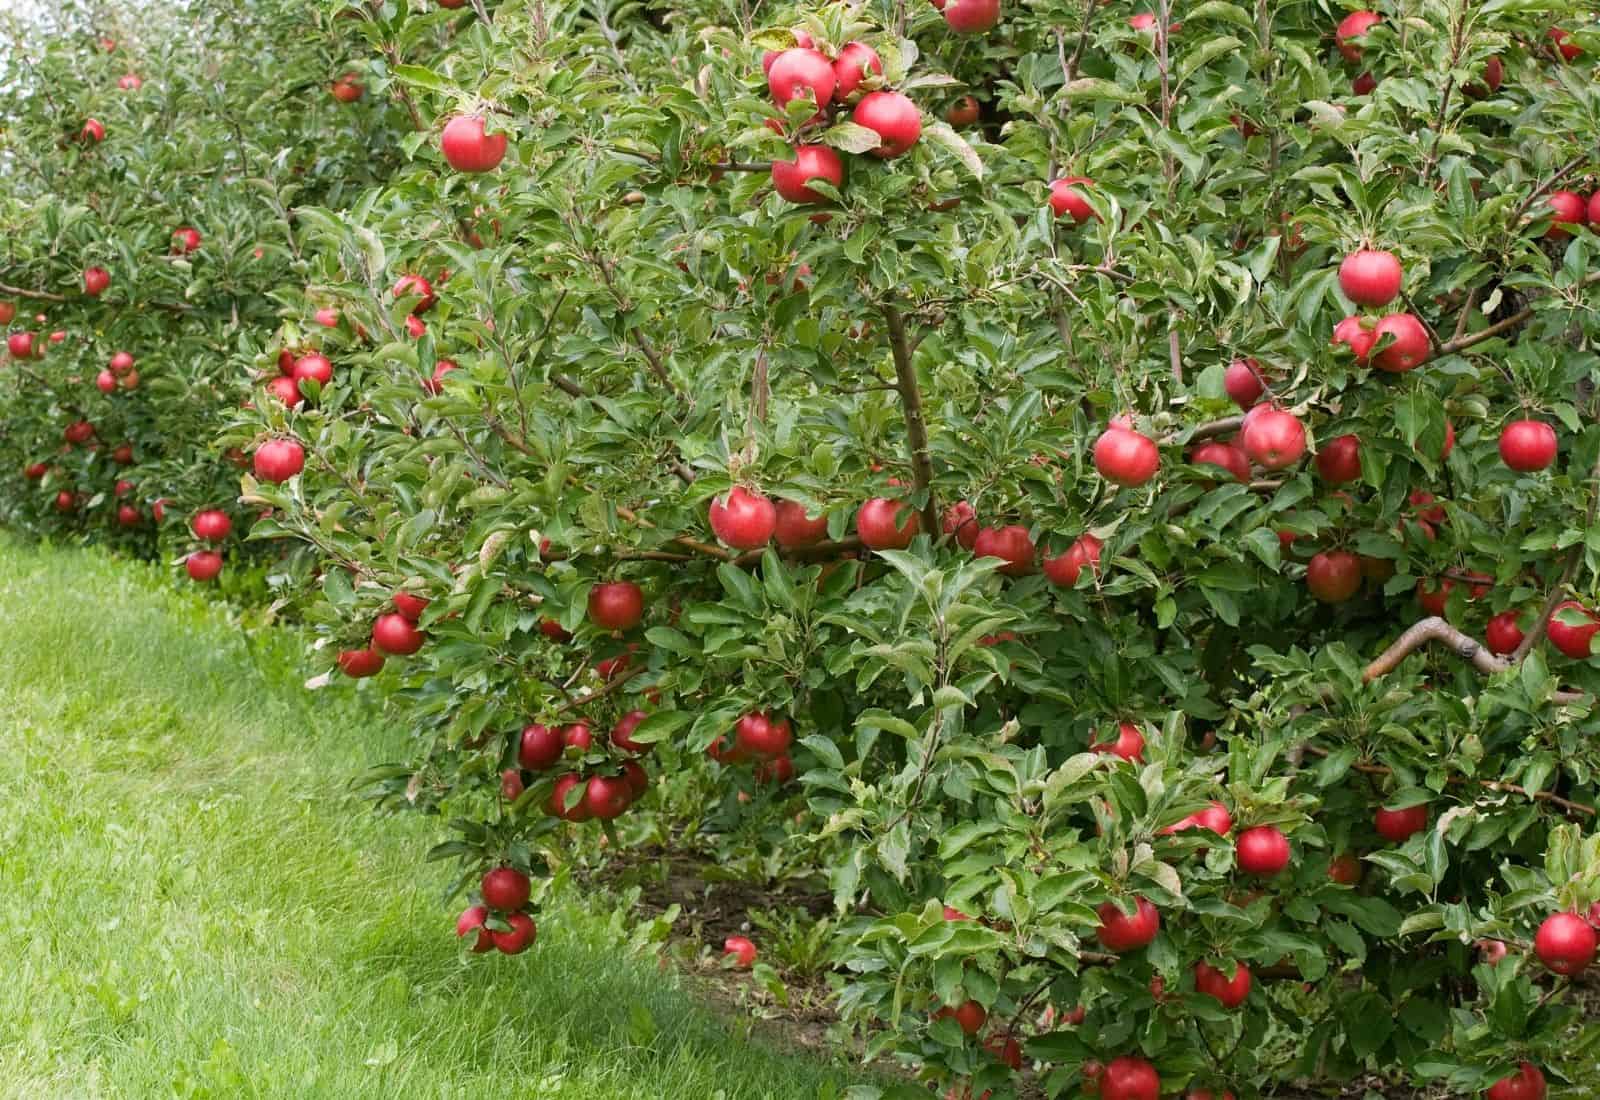 Empire apples on the tree